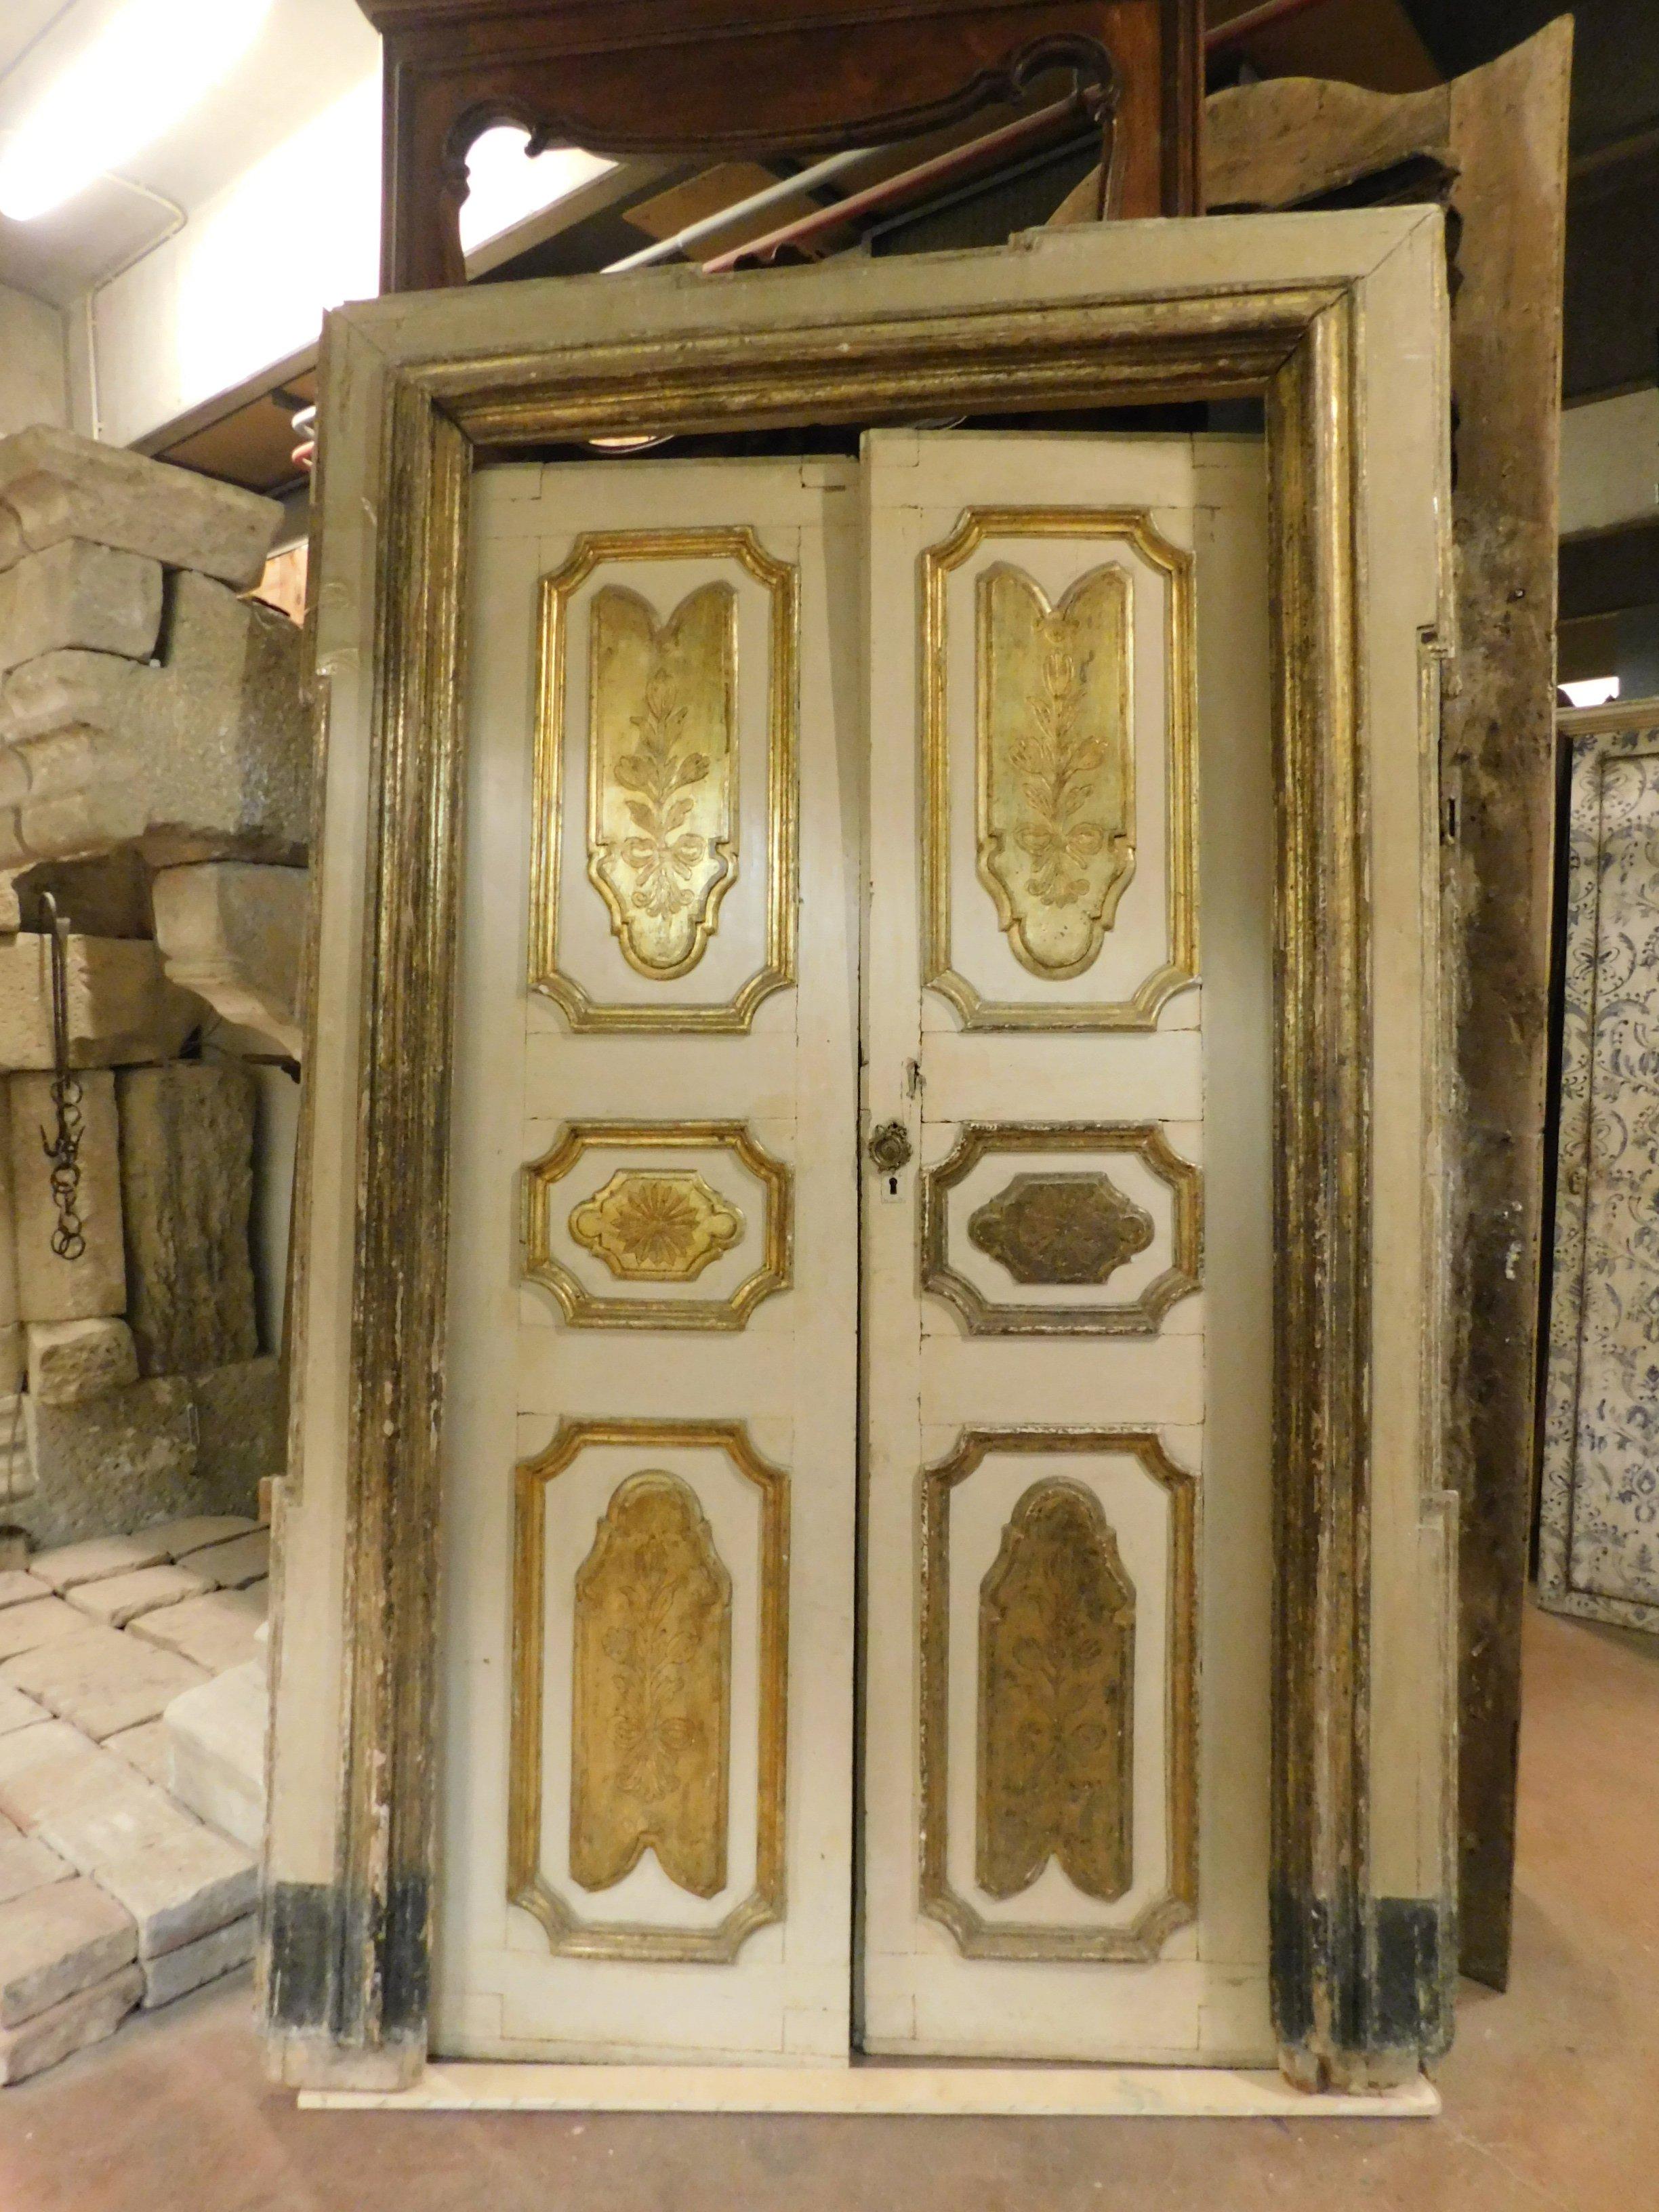 Gilt Antique Set of 3 Double-Wing Doors, Ivory and Gilded, 18th Century, Italy For Sale